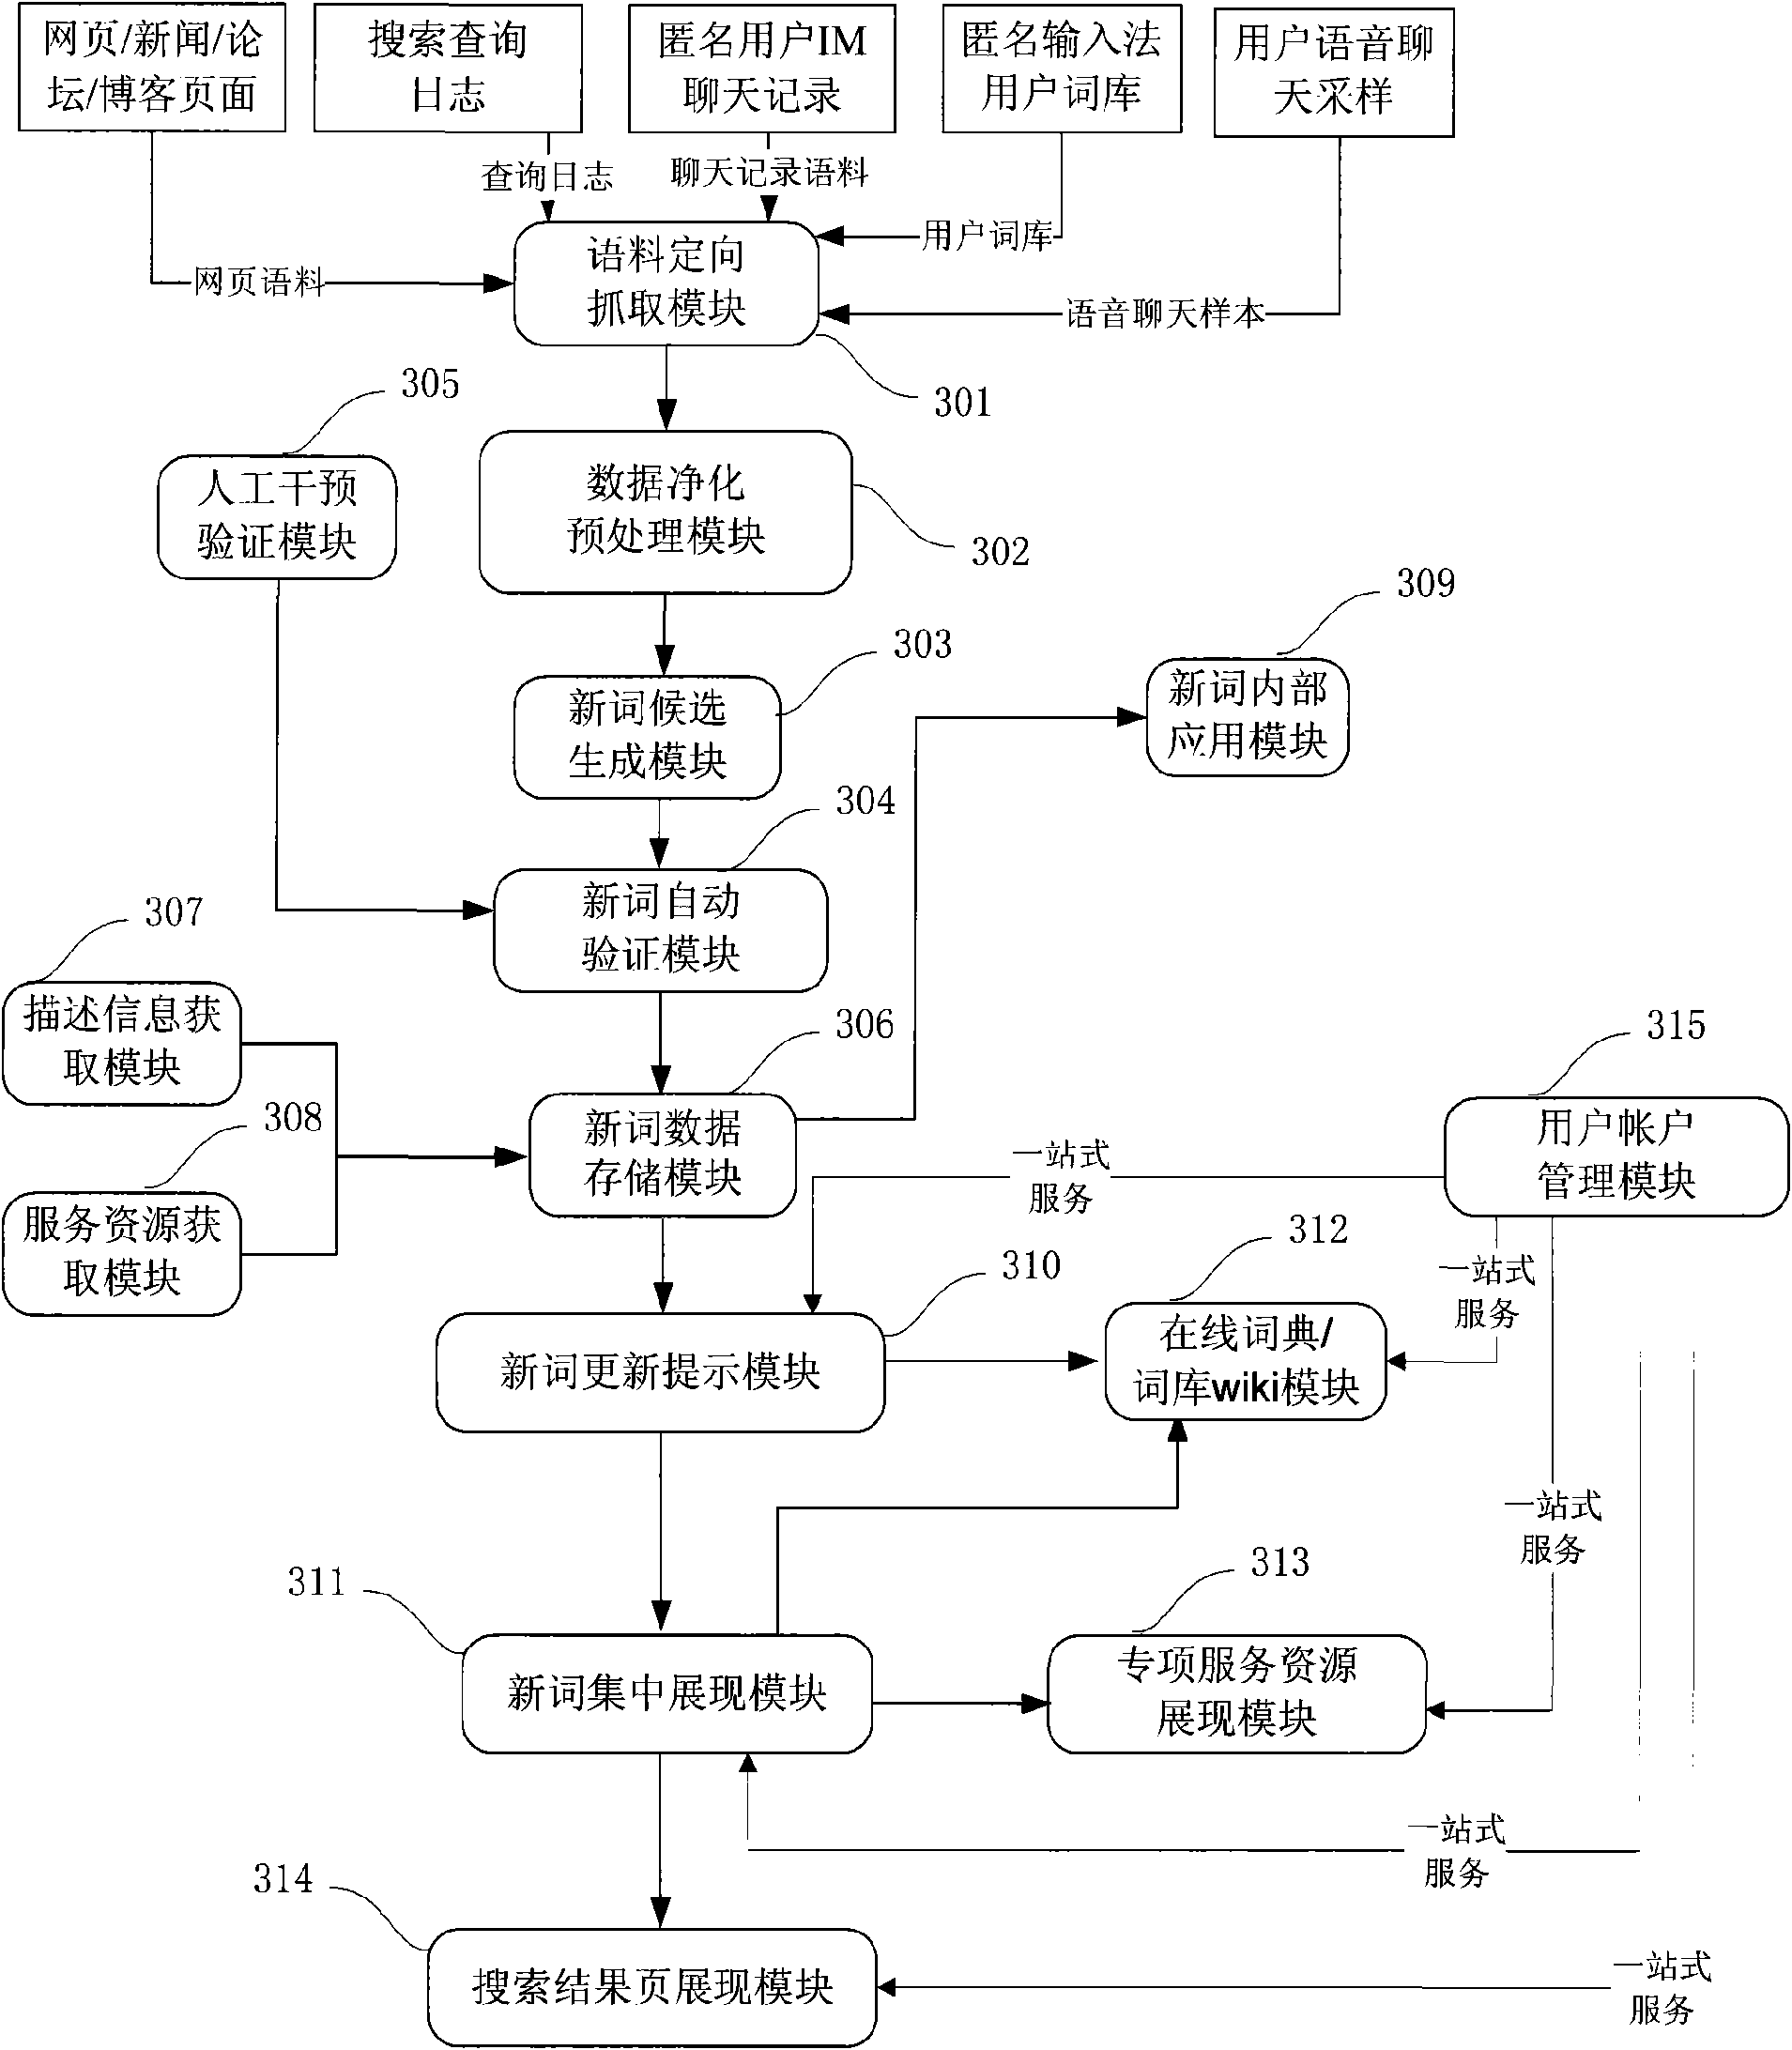 Method and system for integral release of internet information